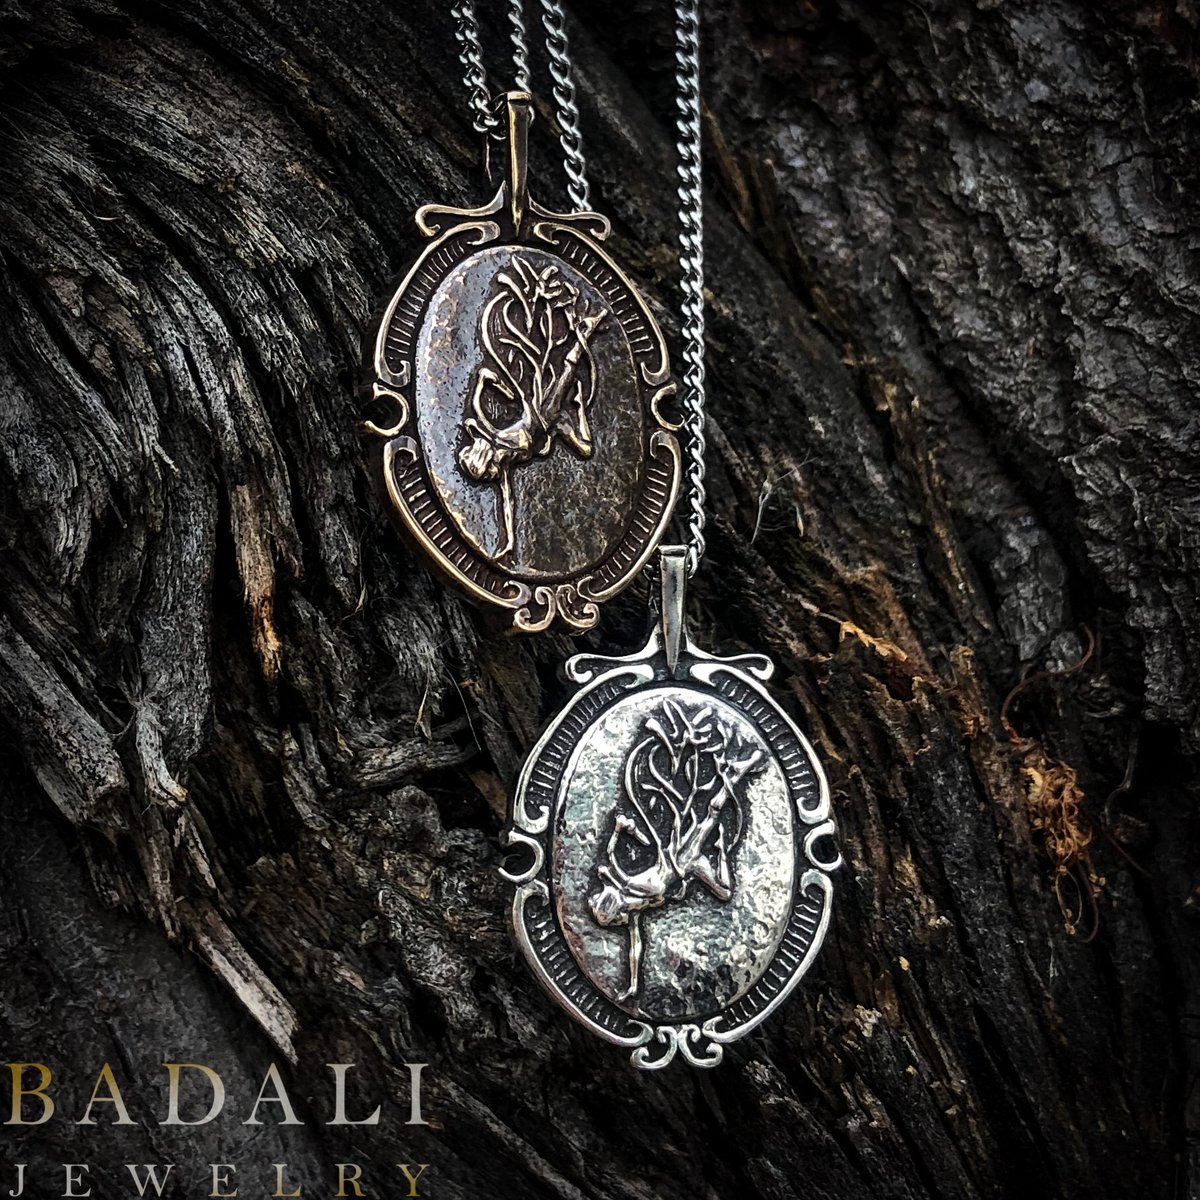 “I represent that one thing you’ve never been able to kill, no matter how hard you try. I am hope.” badalijewelry.com/collections/mi… @BrandSanderson @IzykStewart @DragonsteelBook #Cosmere #Mistborn #mistborntrilogy #ascendantwarrior